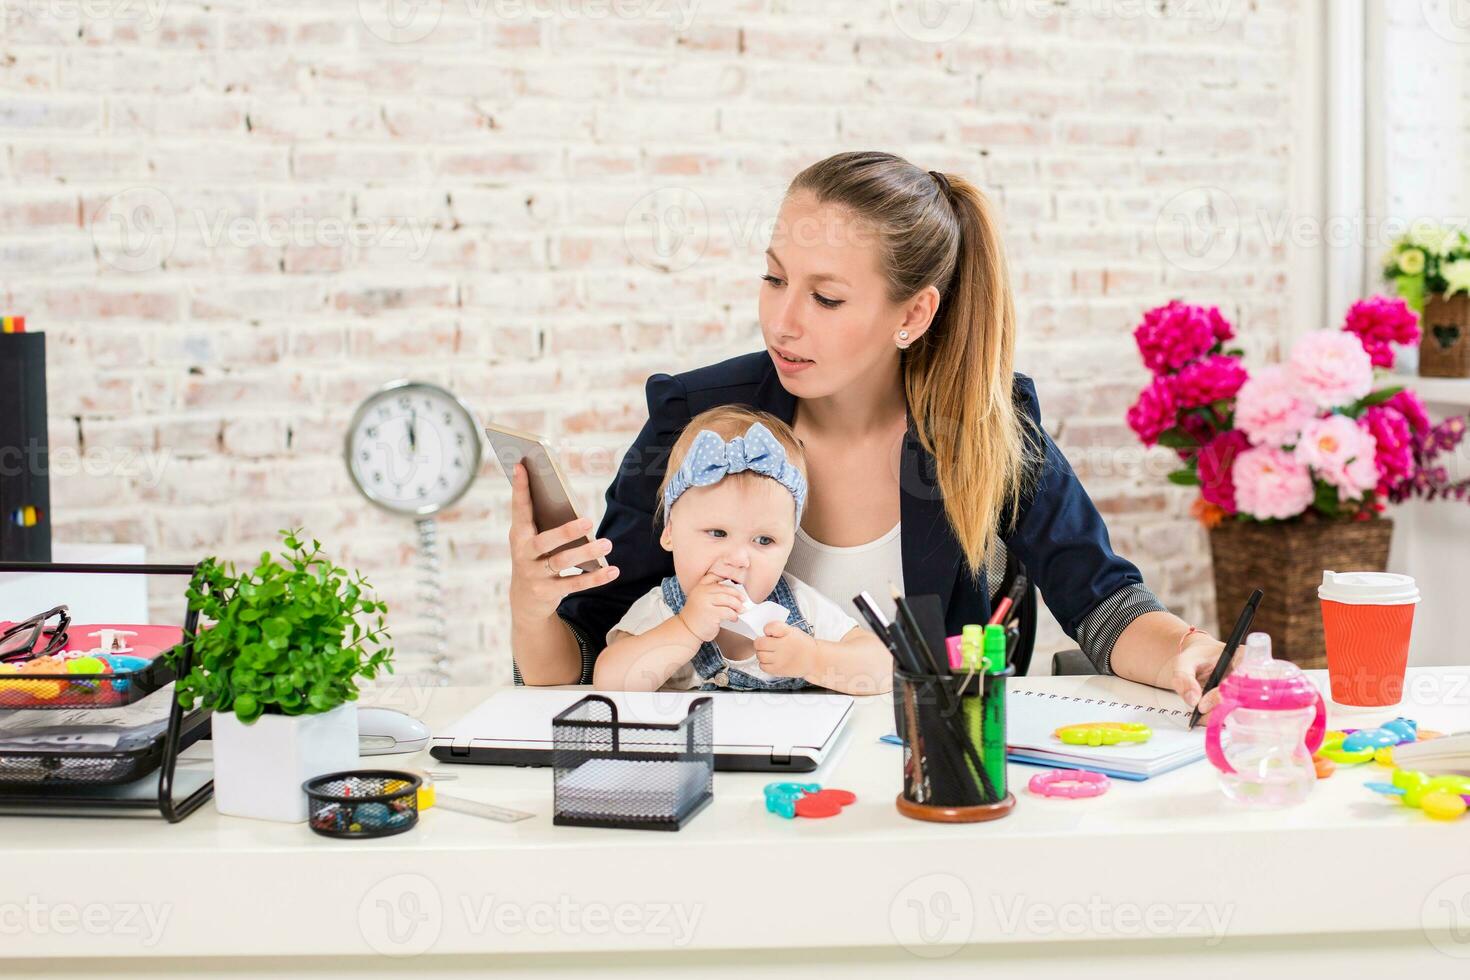 Family Business - telecommute Businesswoman and mother with kid is making a phone call photo